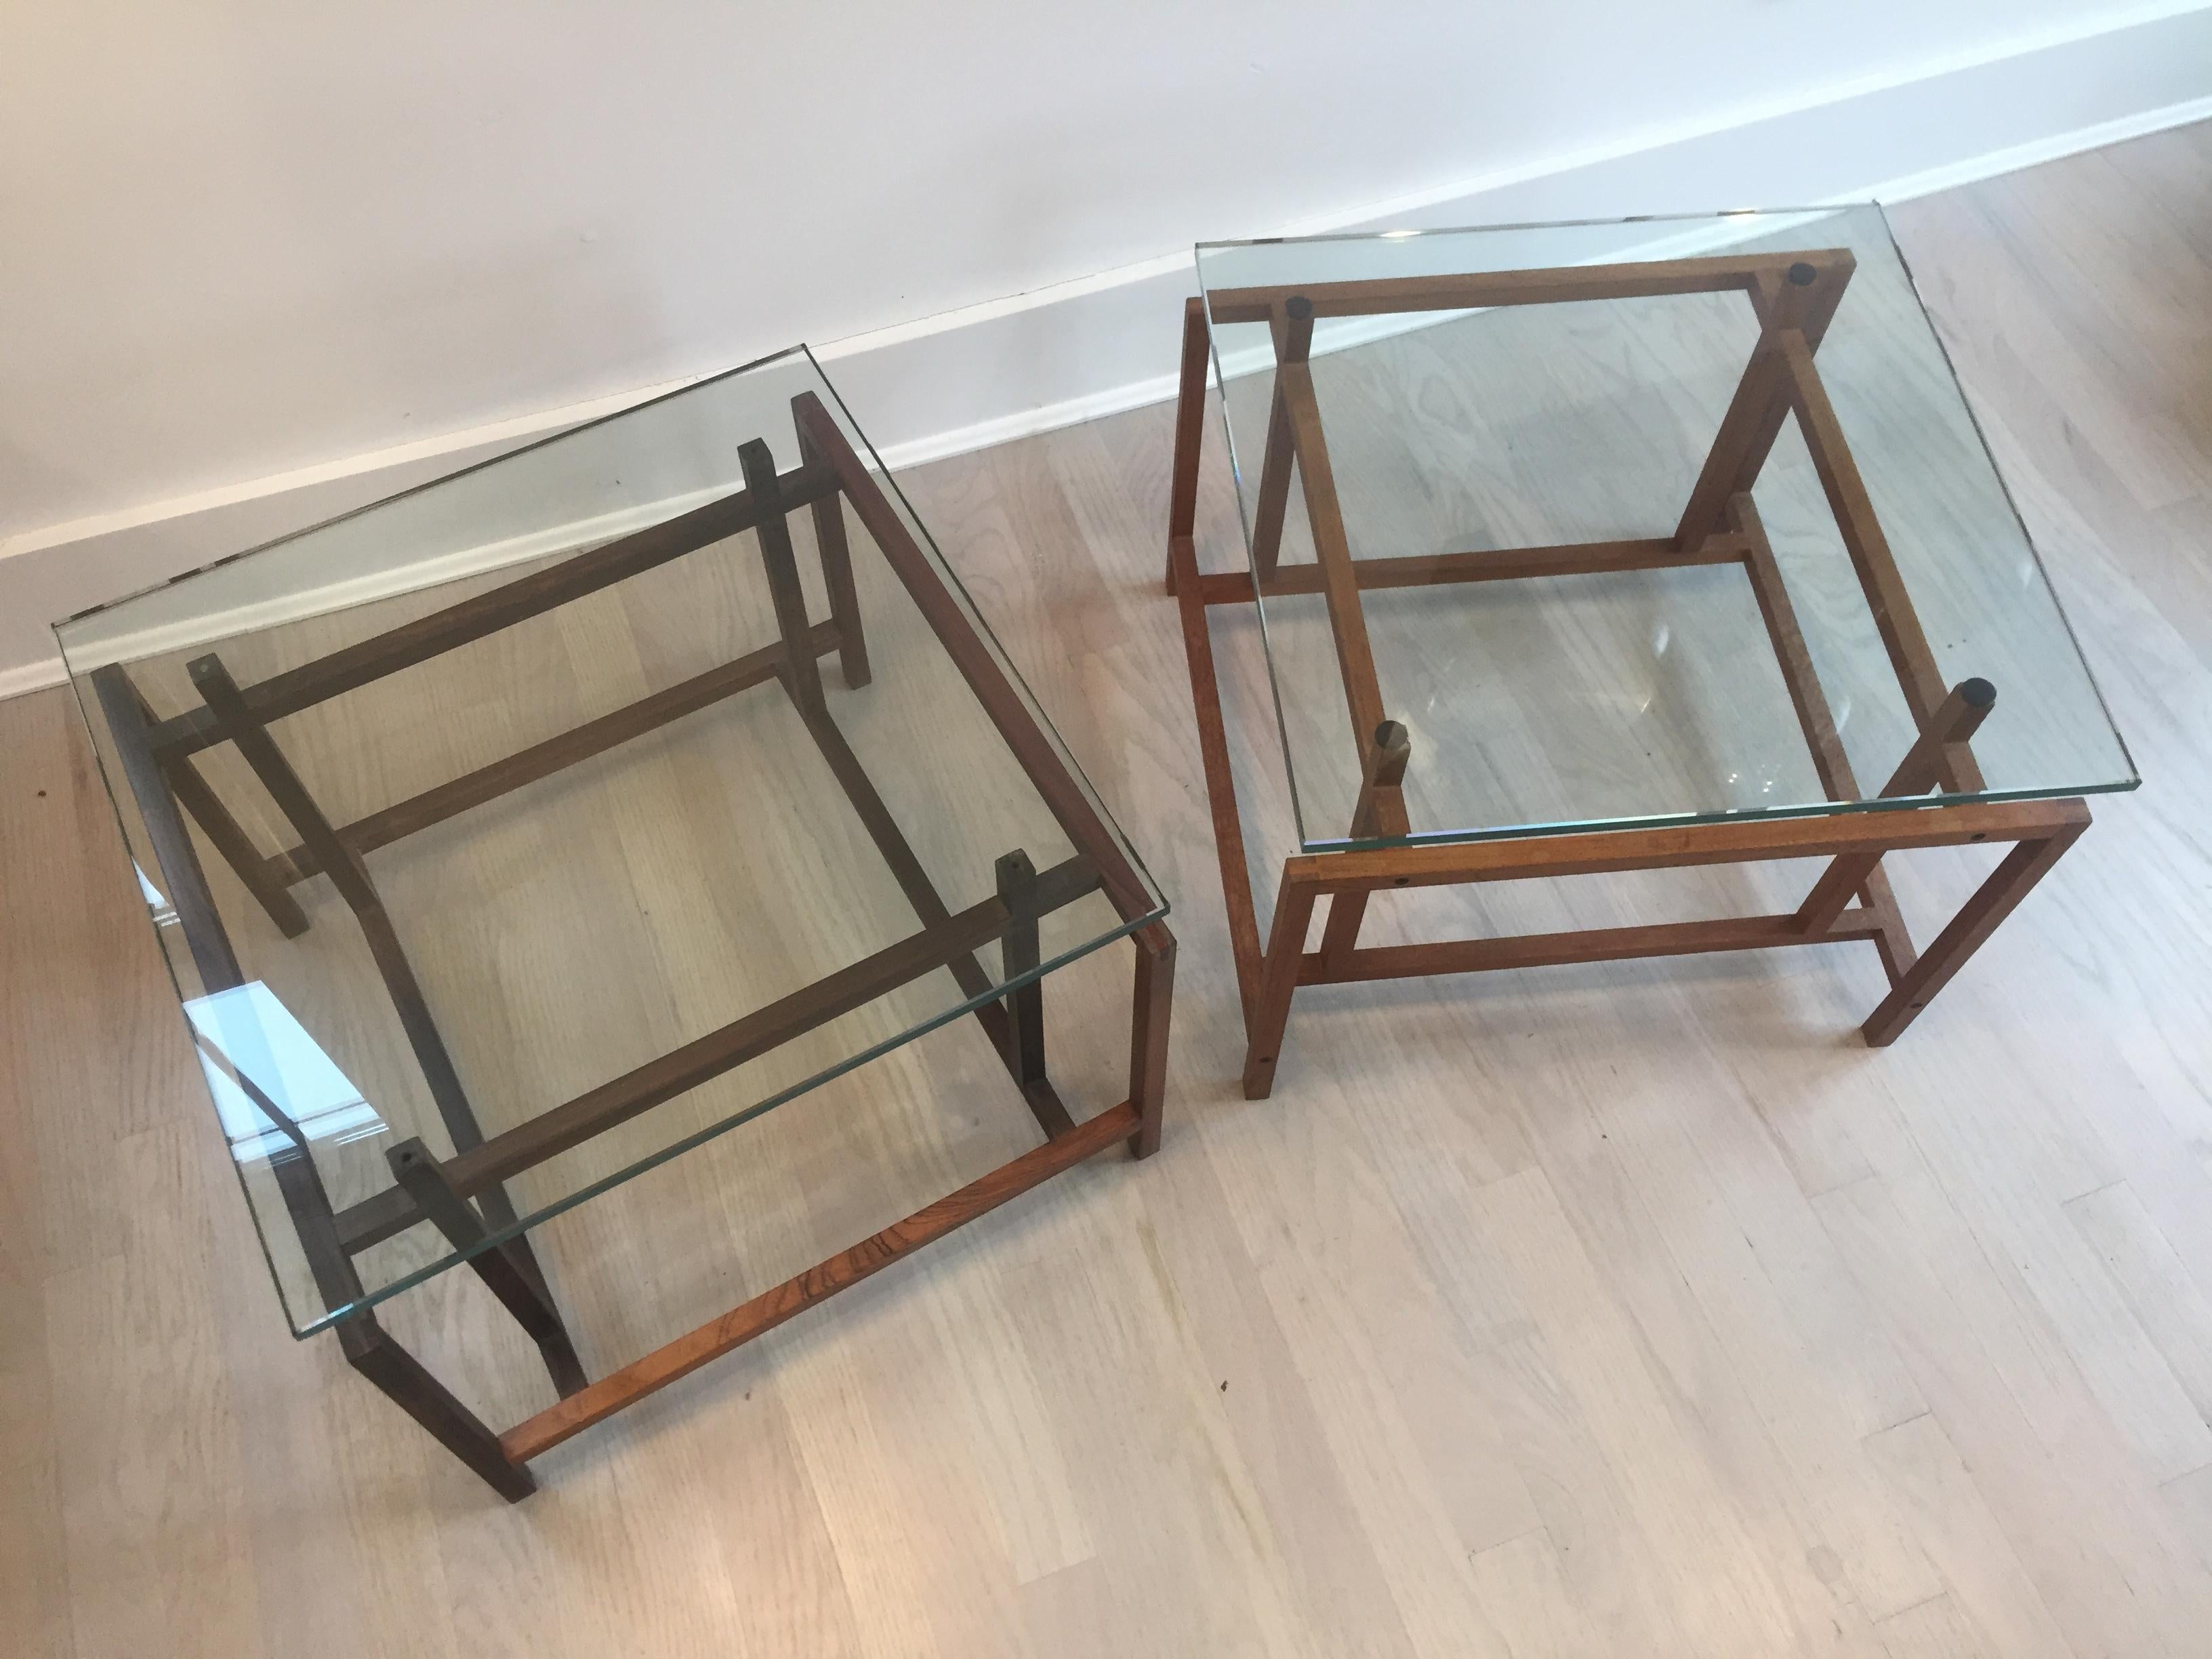 Pair of Henning Norgaard 1960s Danish modern side tables for Komfort

One of the tables is certainly rosewood while the other is slightly lighter in color and may be teak. They are both topped by 1/4” green hued glass.

Measure: 19.5” square and